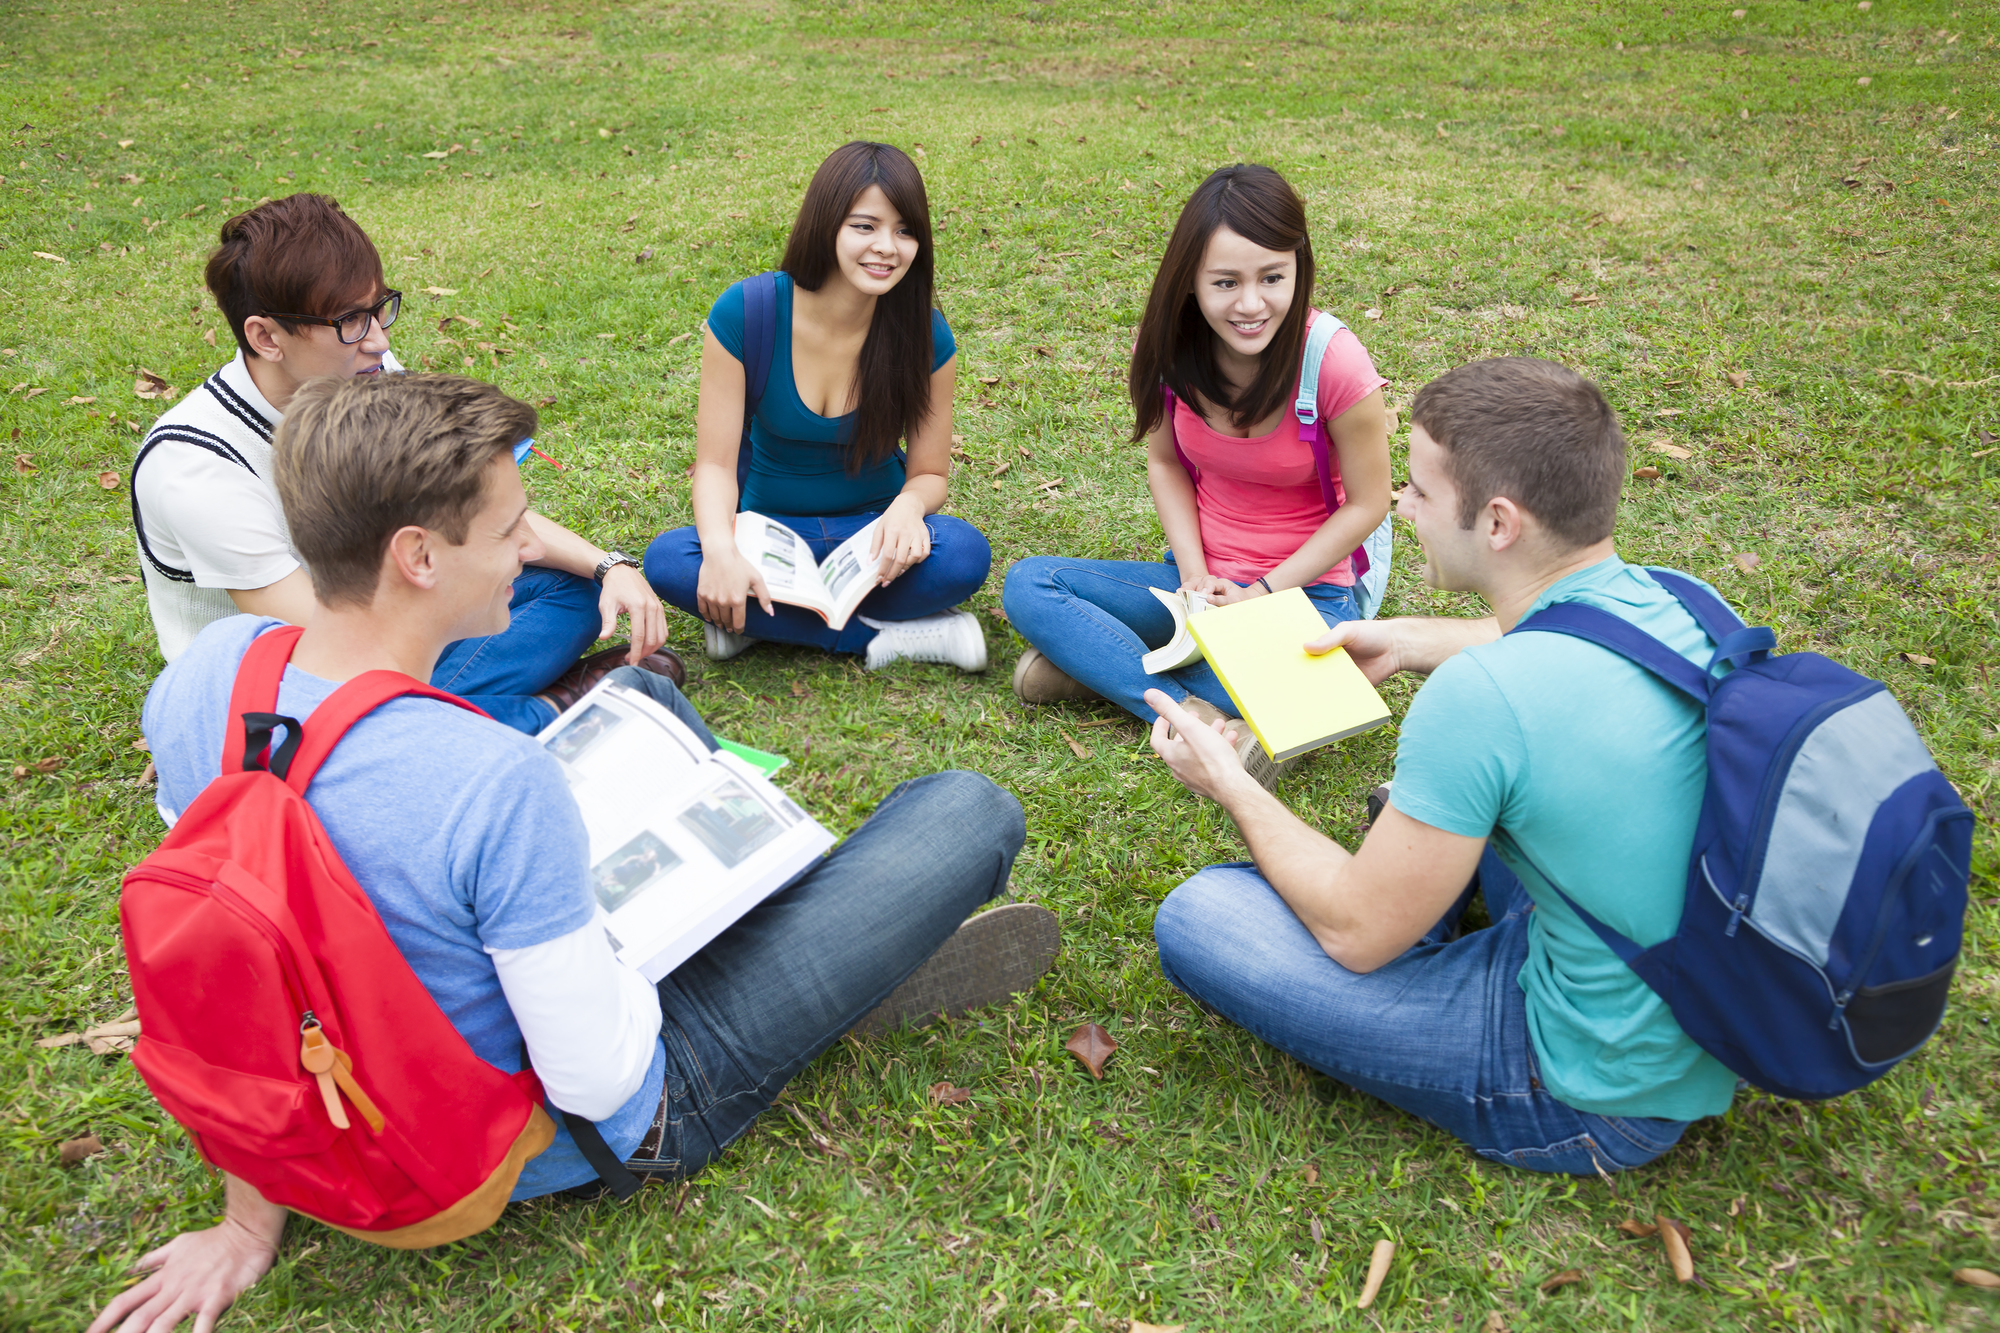 College students studying and discuss together in campus